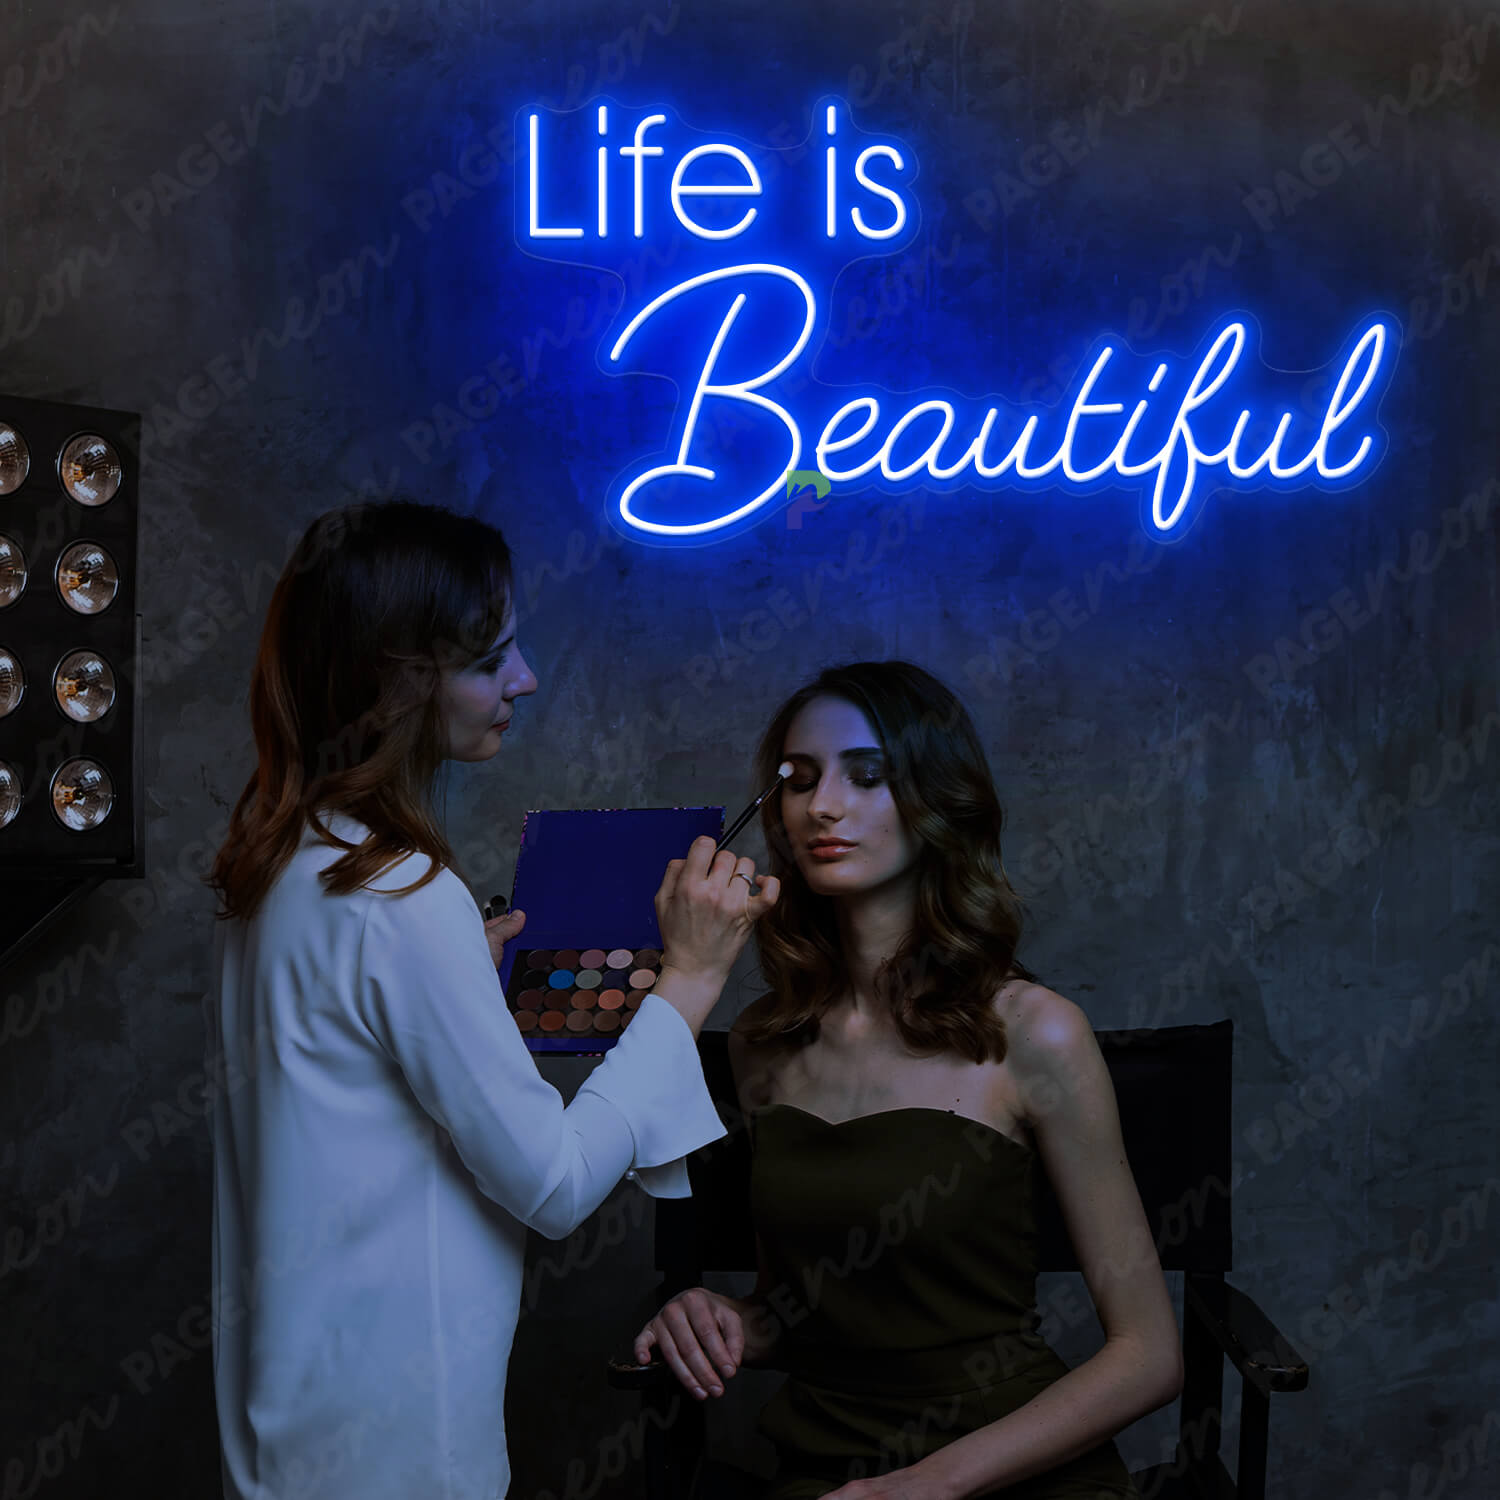 Life Is Beautiful Neon Sign Blue Led Light